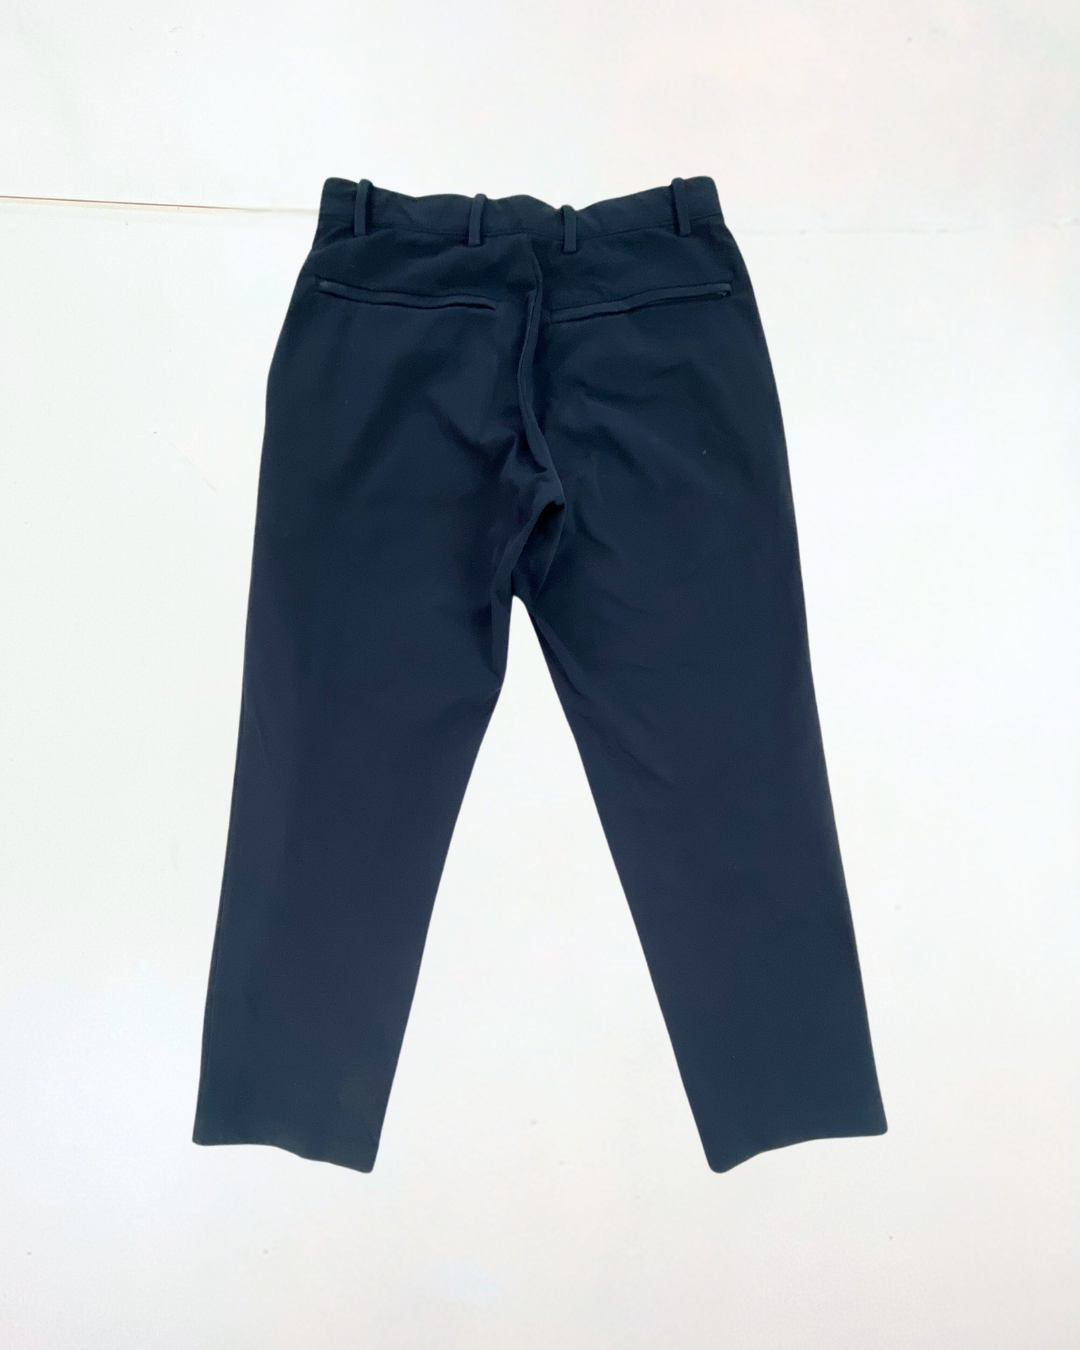 Uniqlo Navy Stretchy Trousers Size S